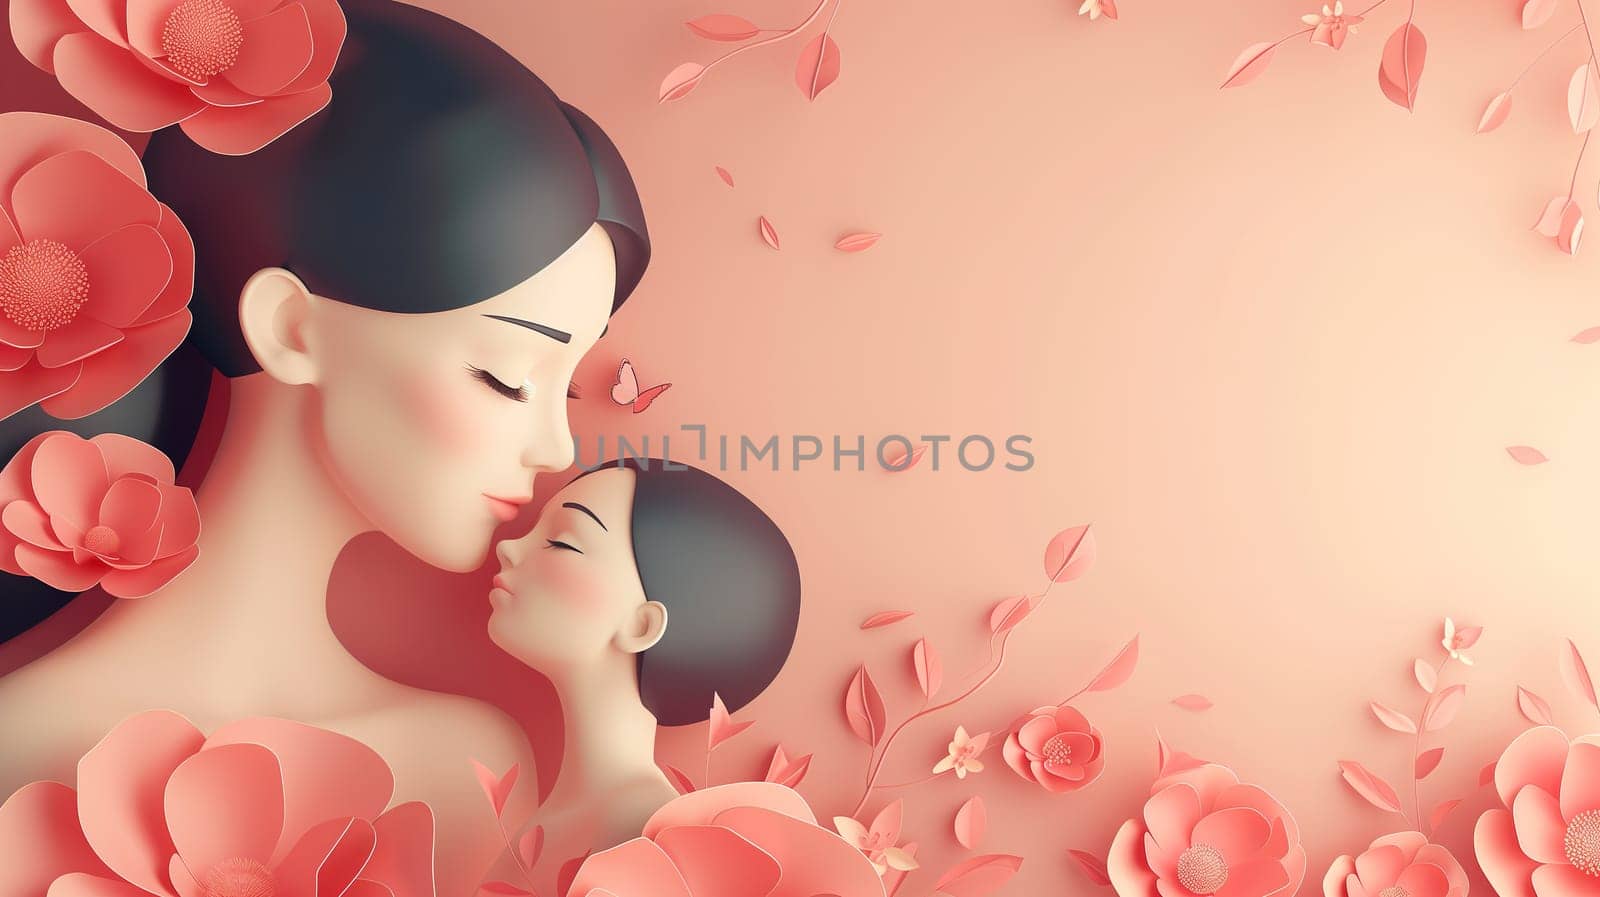 Woman Holding Child Surrounded by Pink Flowers by TRMK